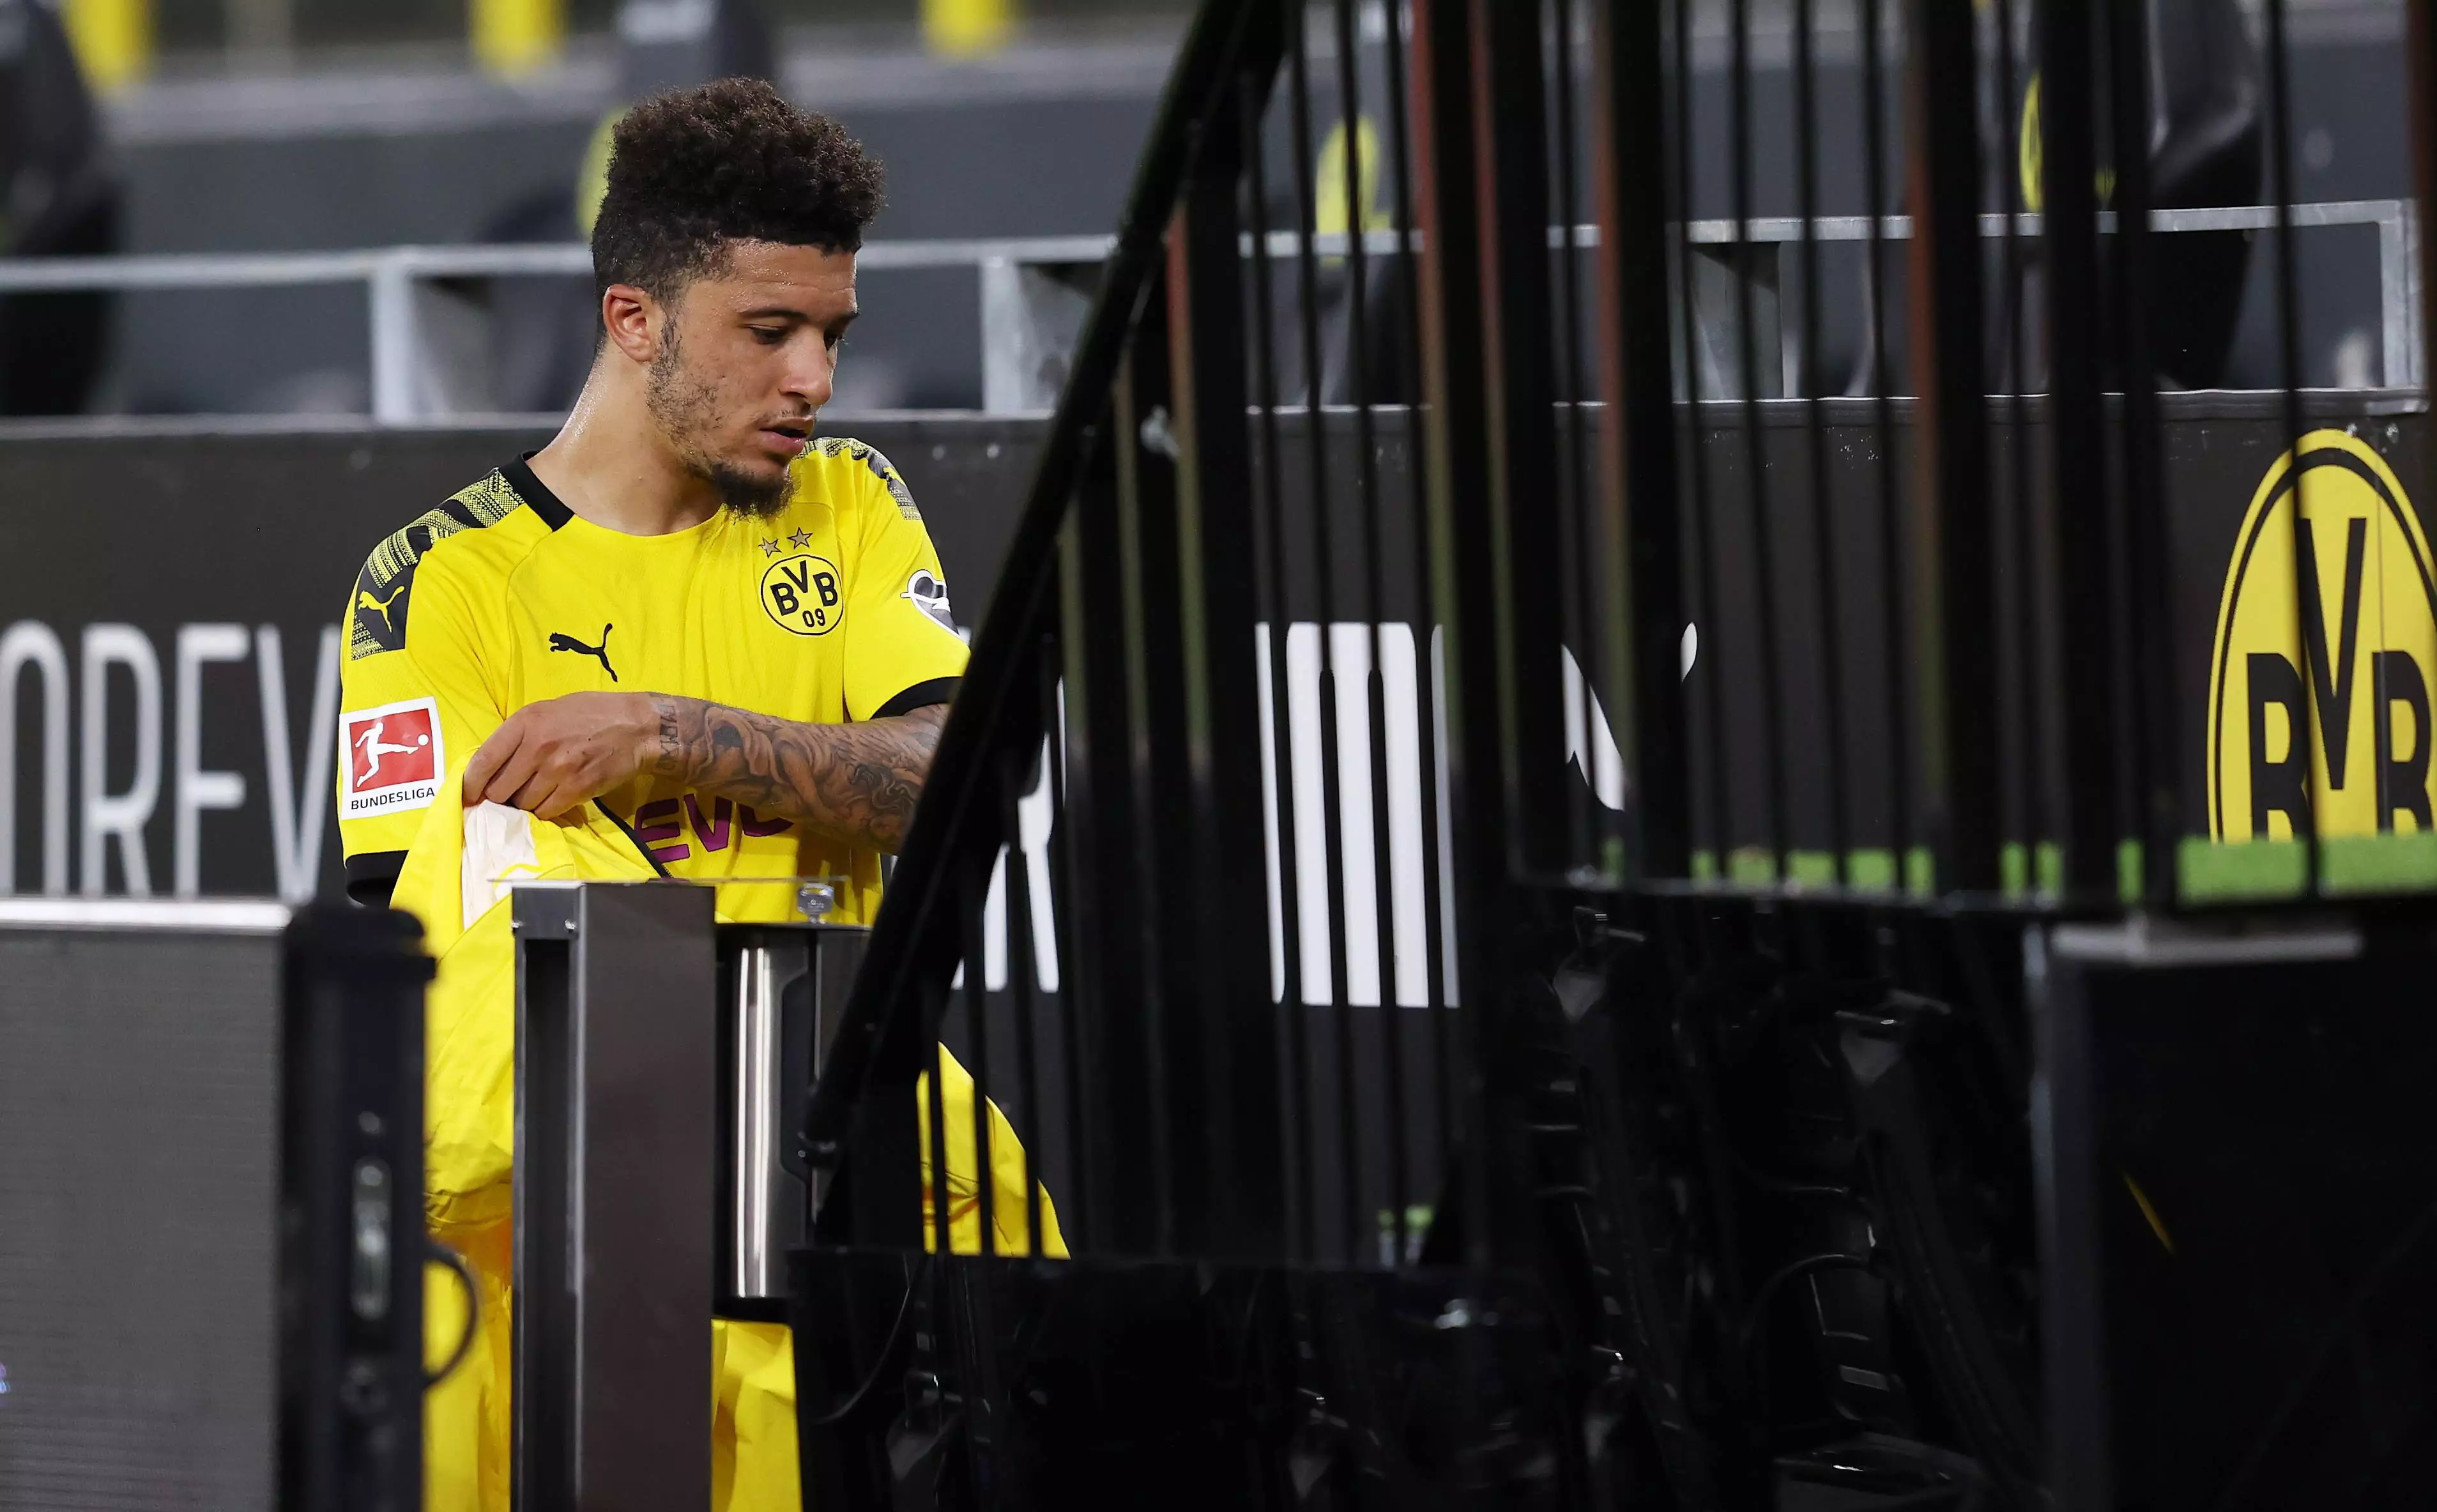 Sancho is expected to join United this summer. Image: PA Images